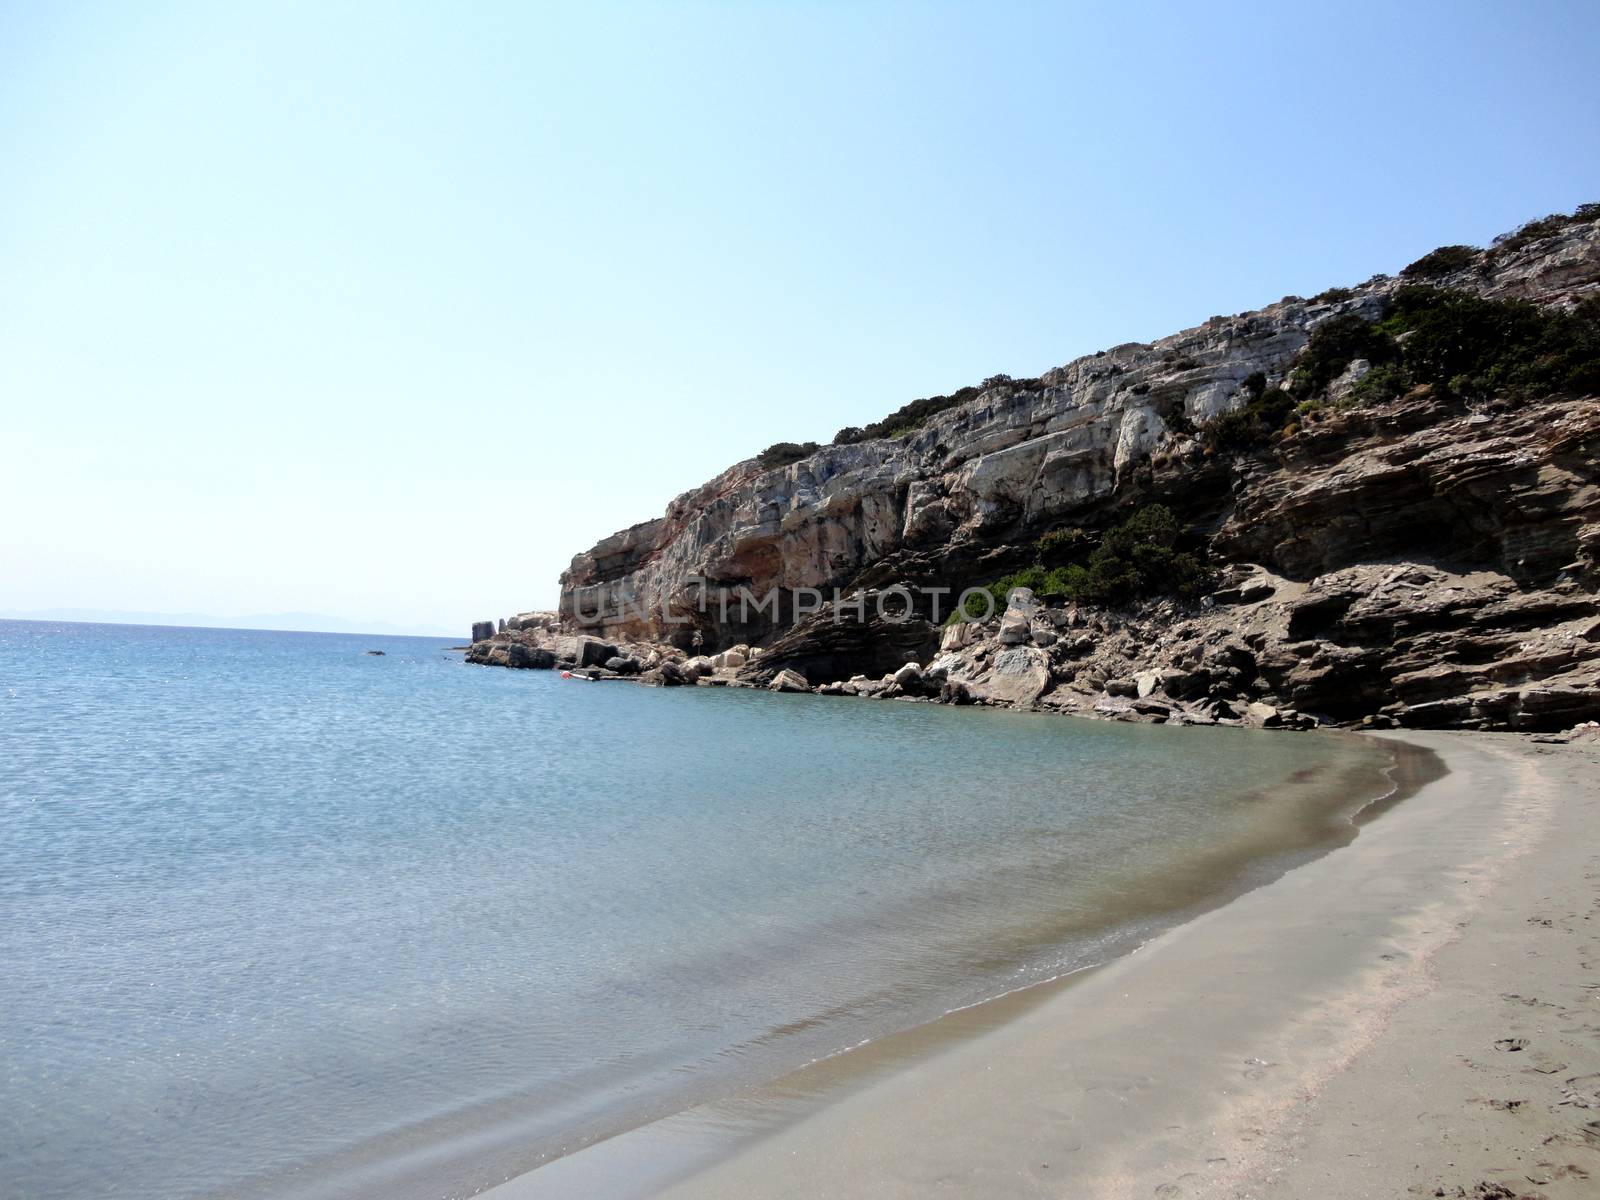 View of a Greek deserted Beach in Despotiko Island, Greece.

Picture taken on September 1, 2011.